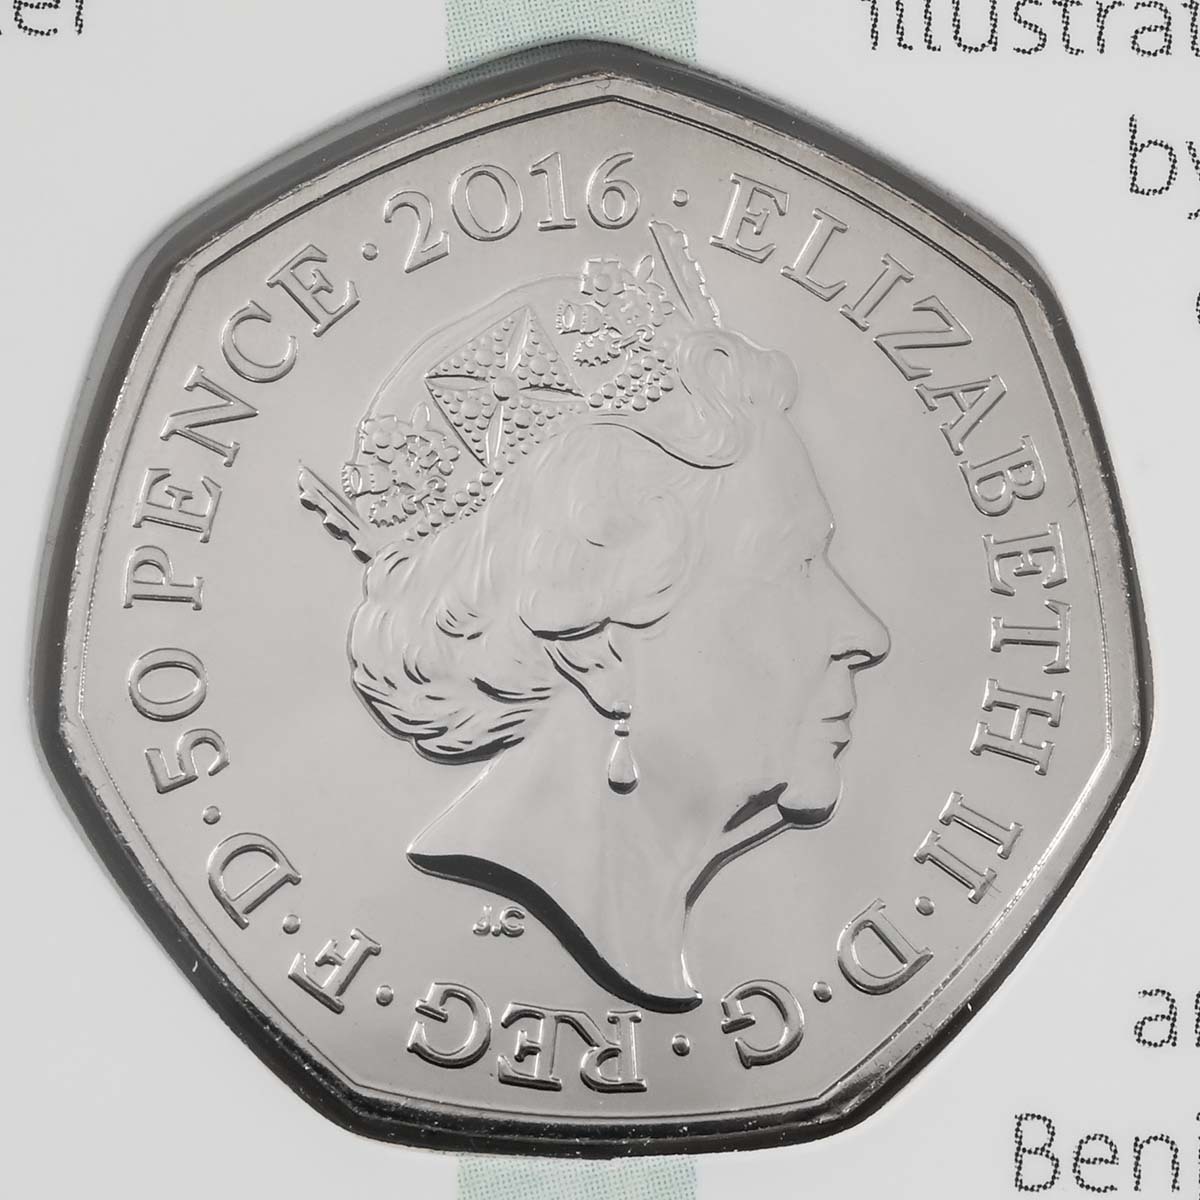 UK16BPBU 2016 Beatrix Potter 150th Anniversary Fifty Pence Brilliant Uncirculated Coin In Folder Obverse